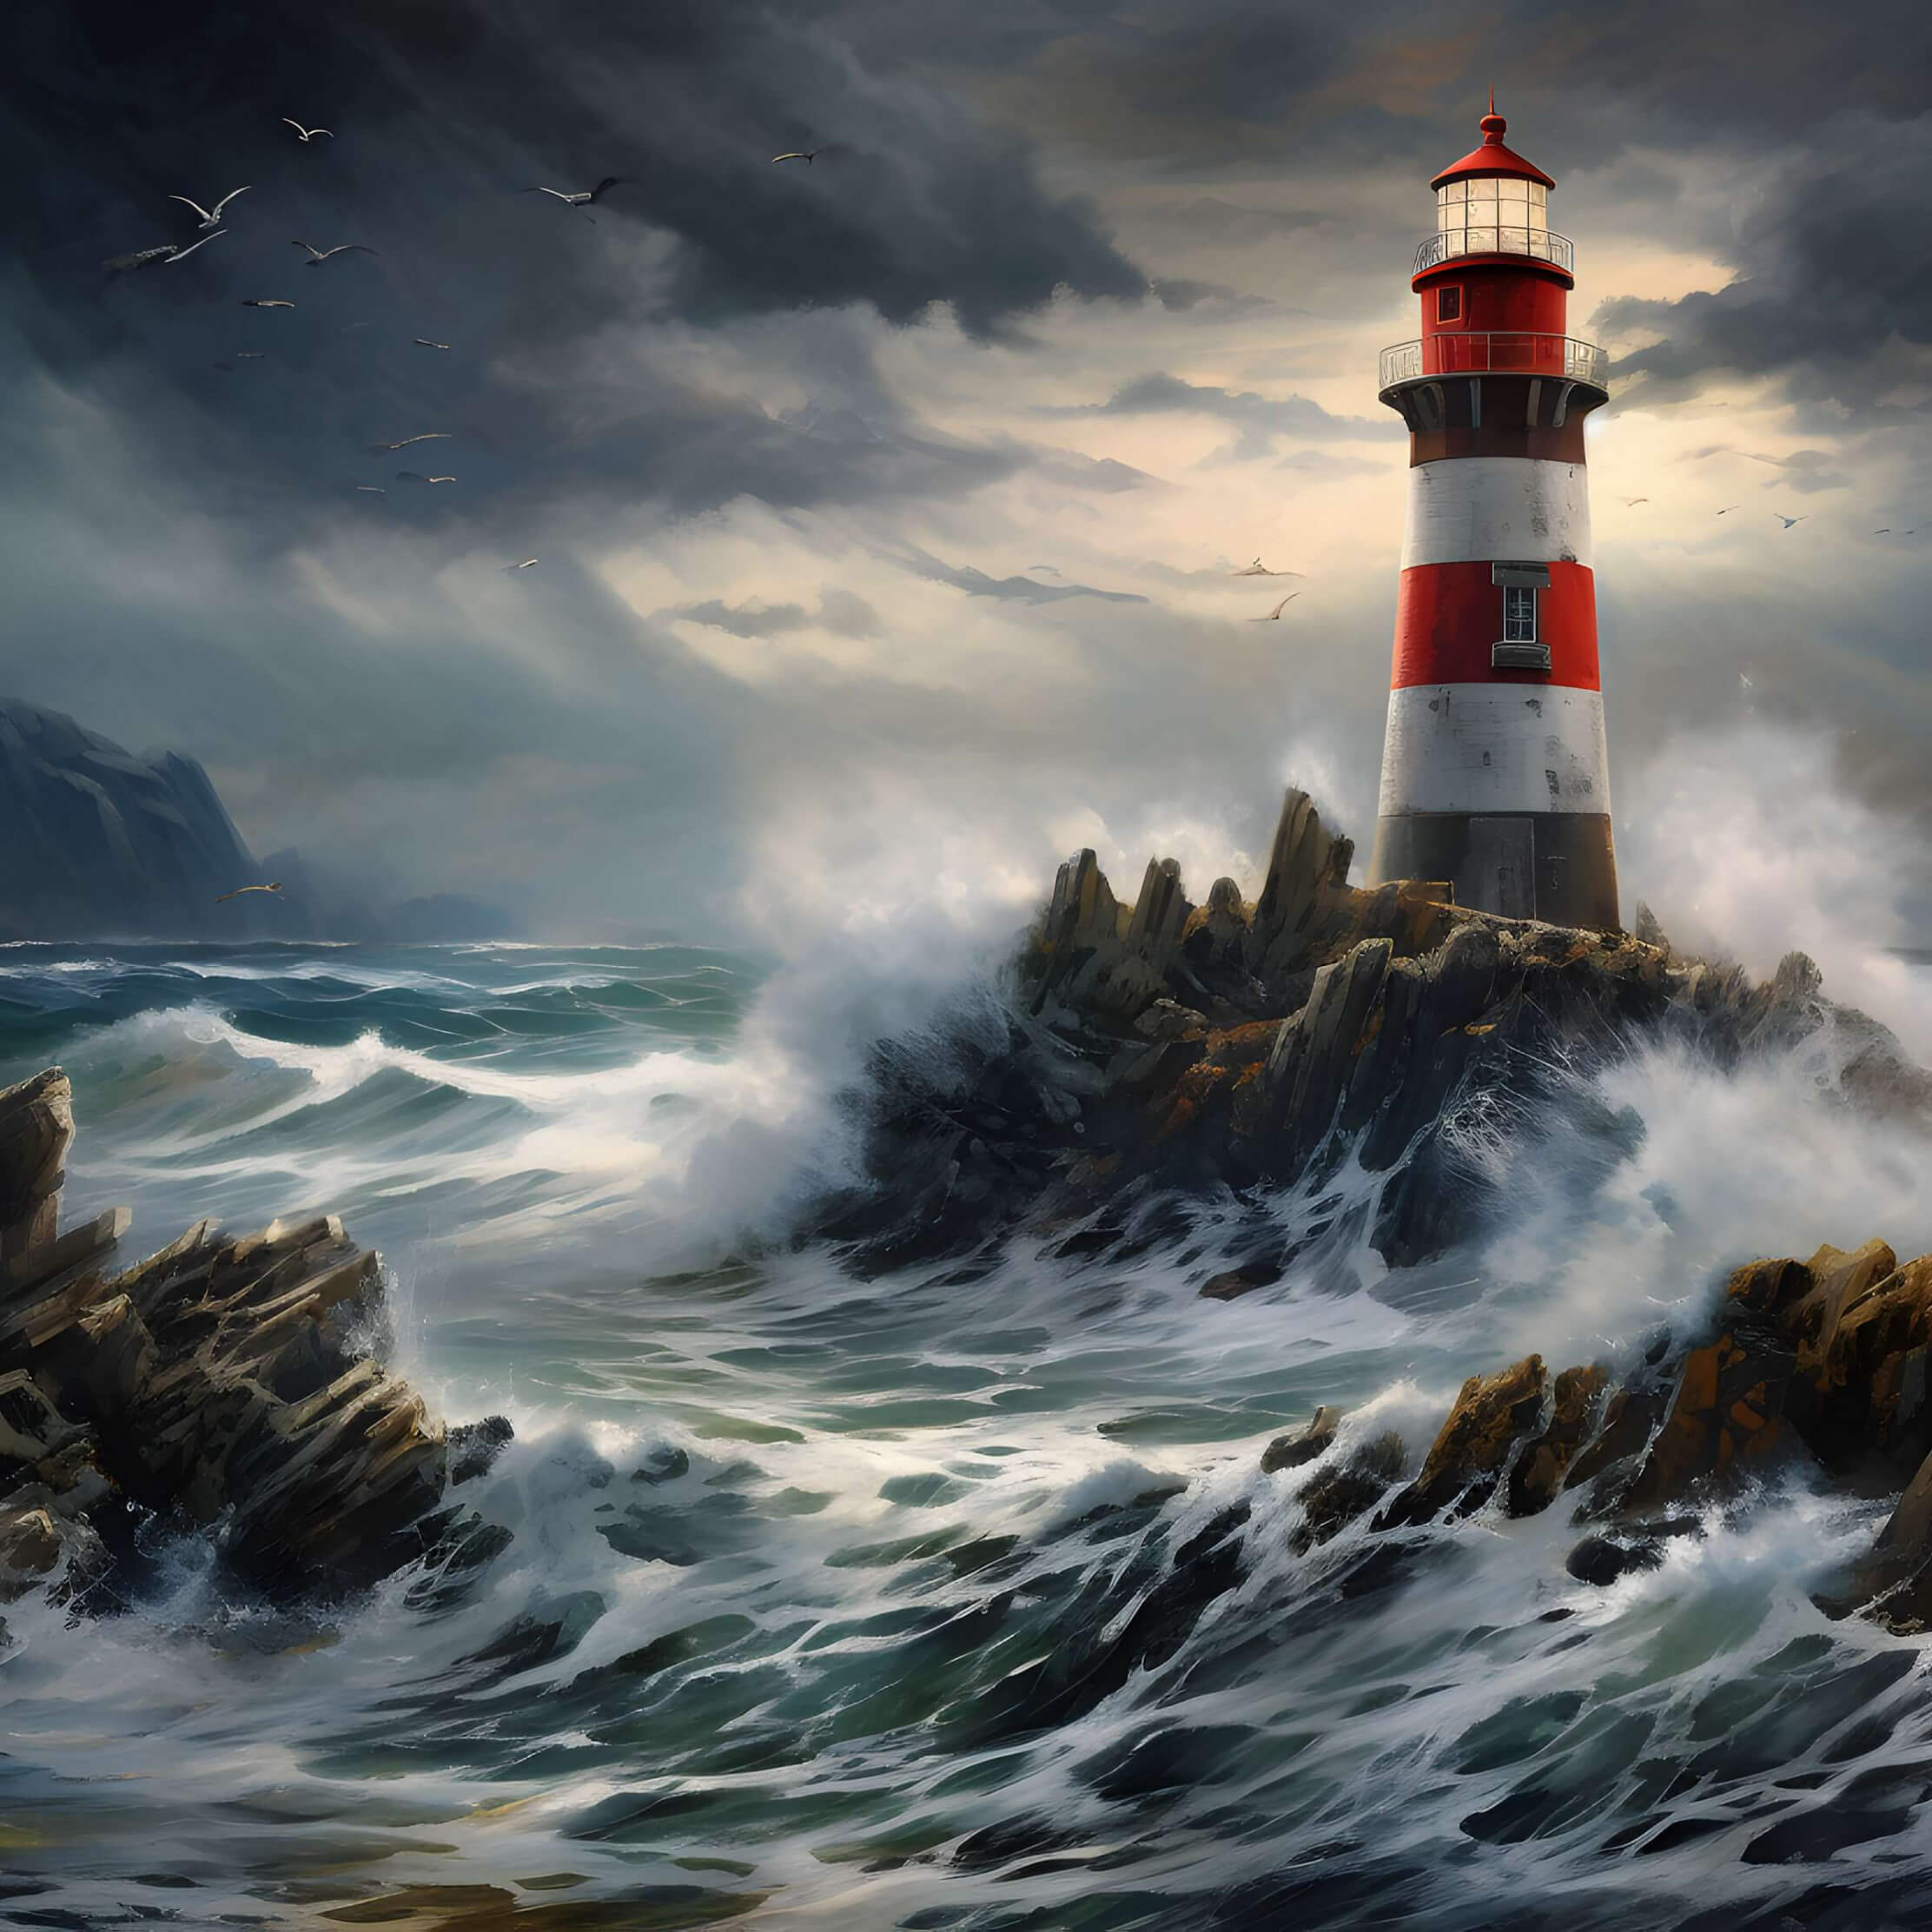 Lighthouse in the ocean waves wallpaper 2224x2224